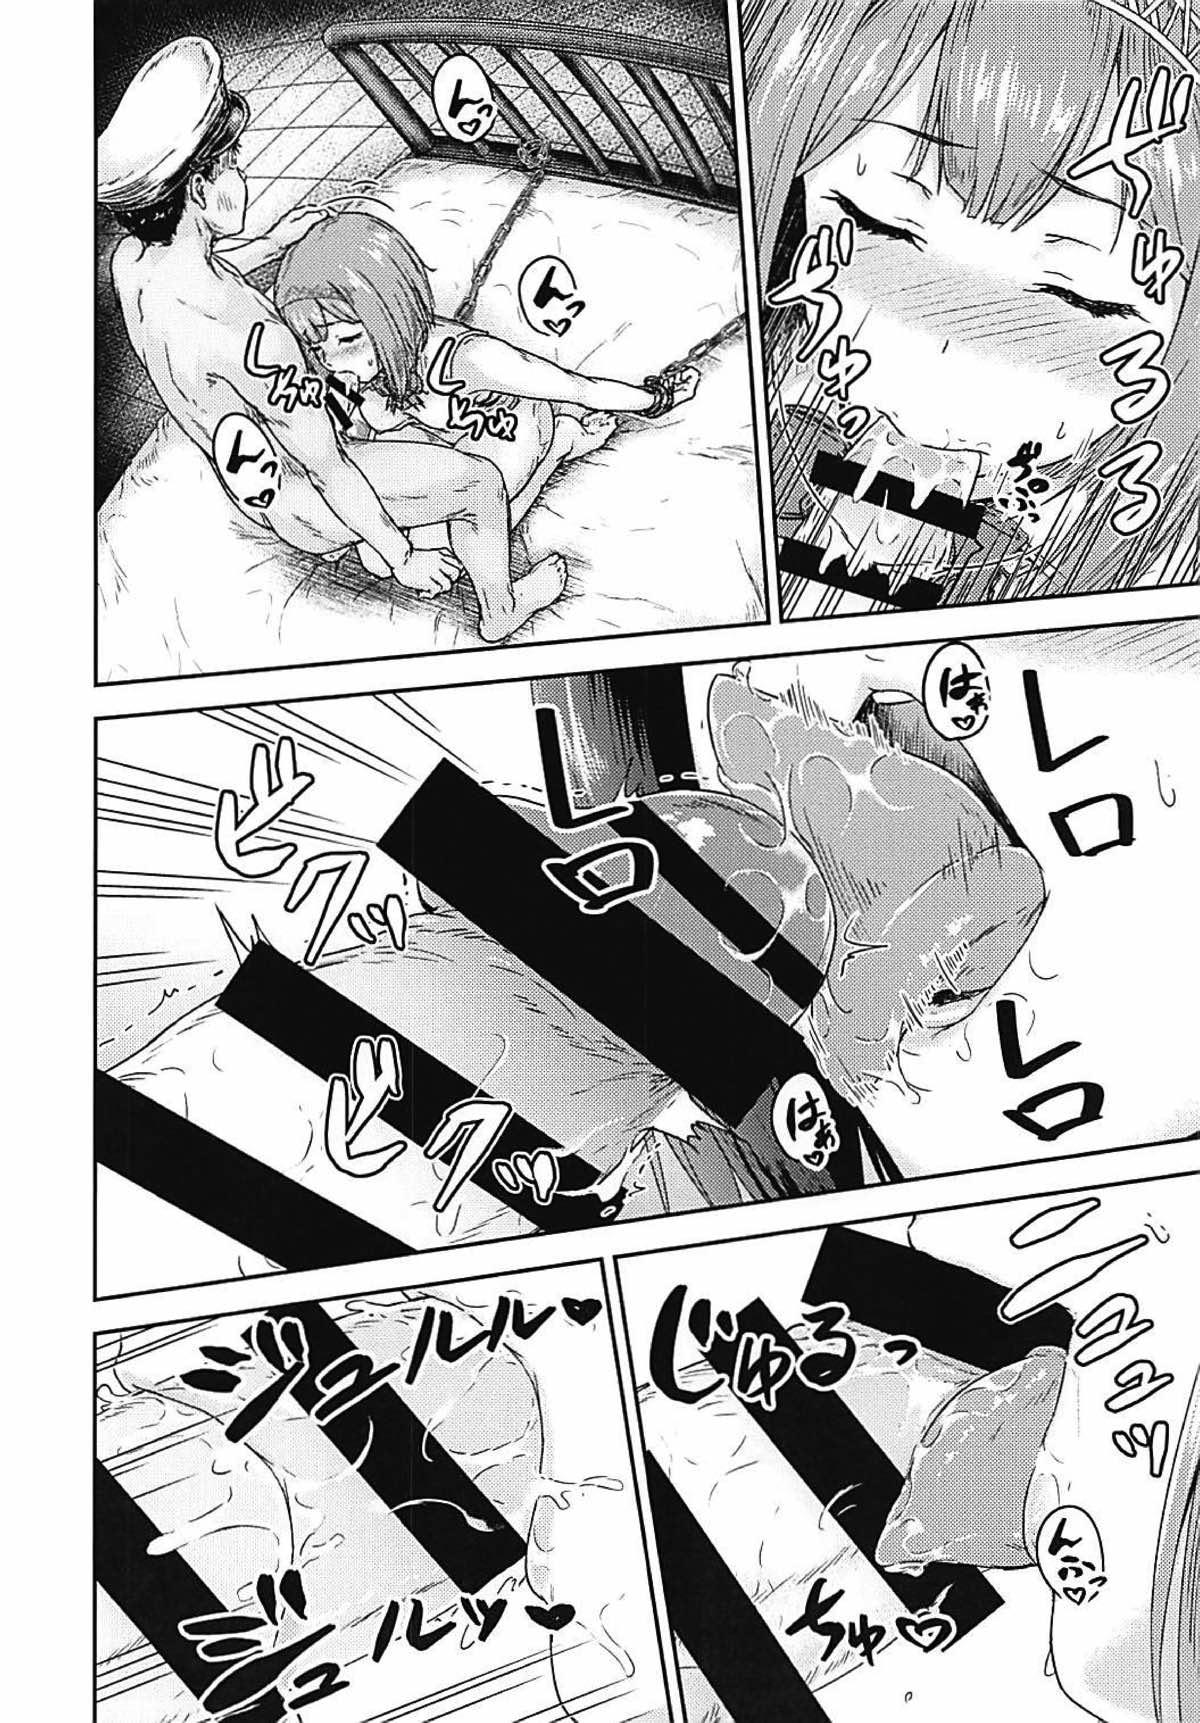 Comendo Bismarck Revenge!! Preview Ban - Kantai collection Squirt - Page 8